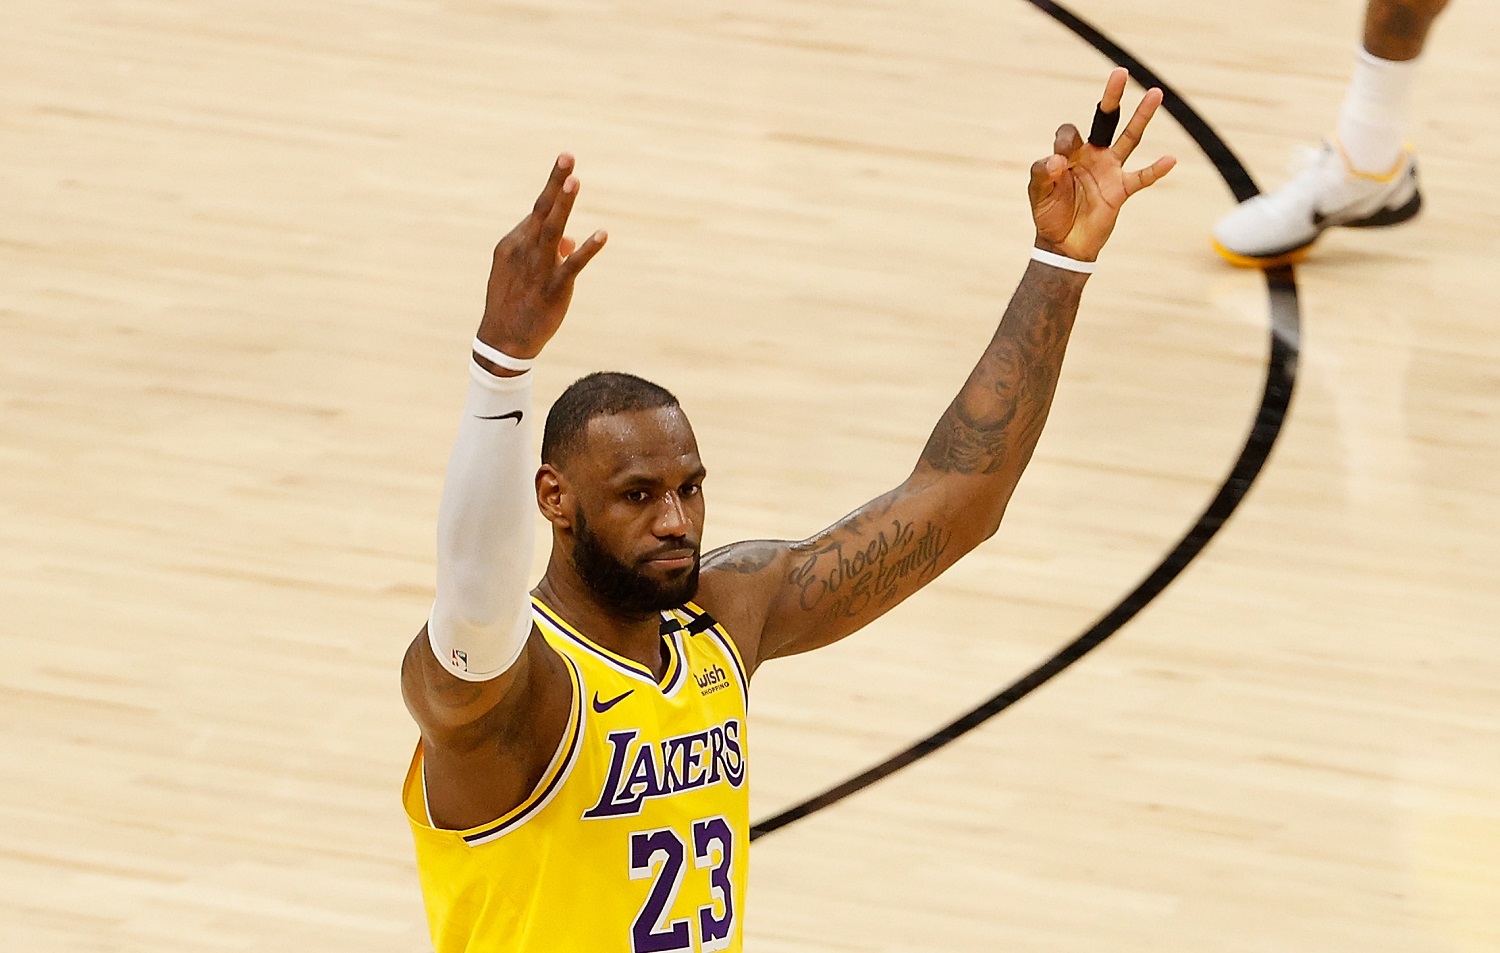 LeBron James of the Los Angeles Lakers reacts to a 3-point shot against the Phoenix Suns during Game 2 of the NBA Western Conference quarterfinals on May 25, 2021. | Christian Petersen/Getty Images